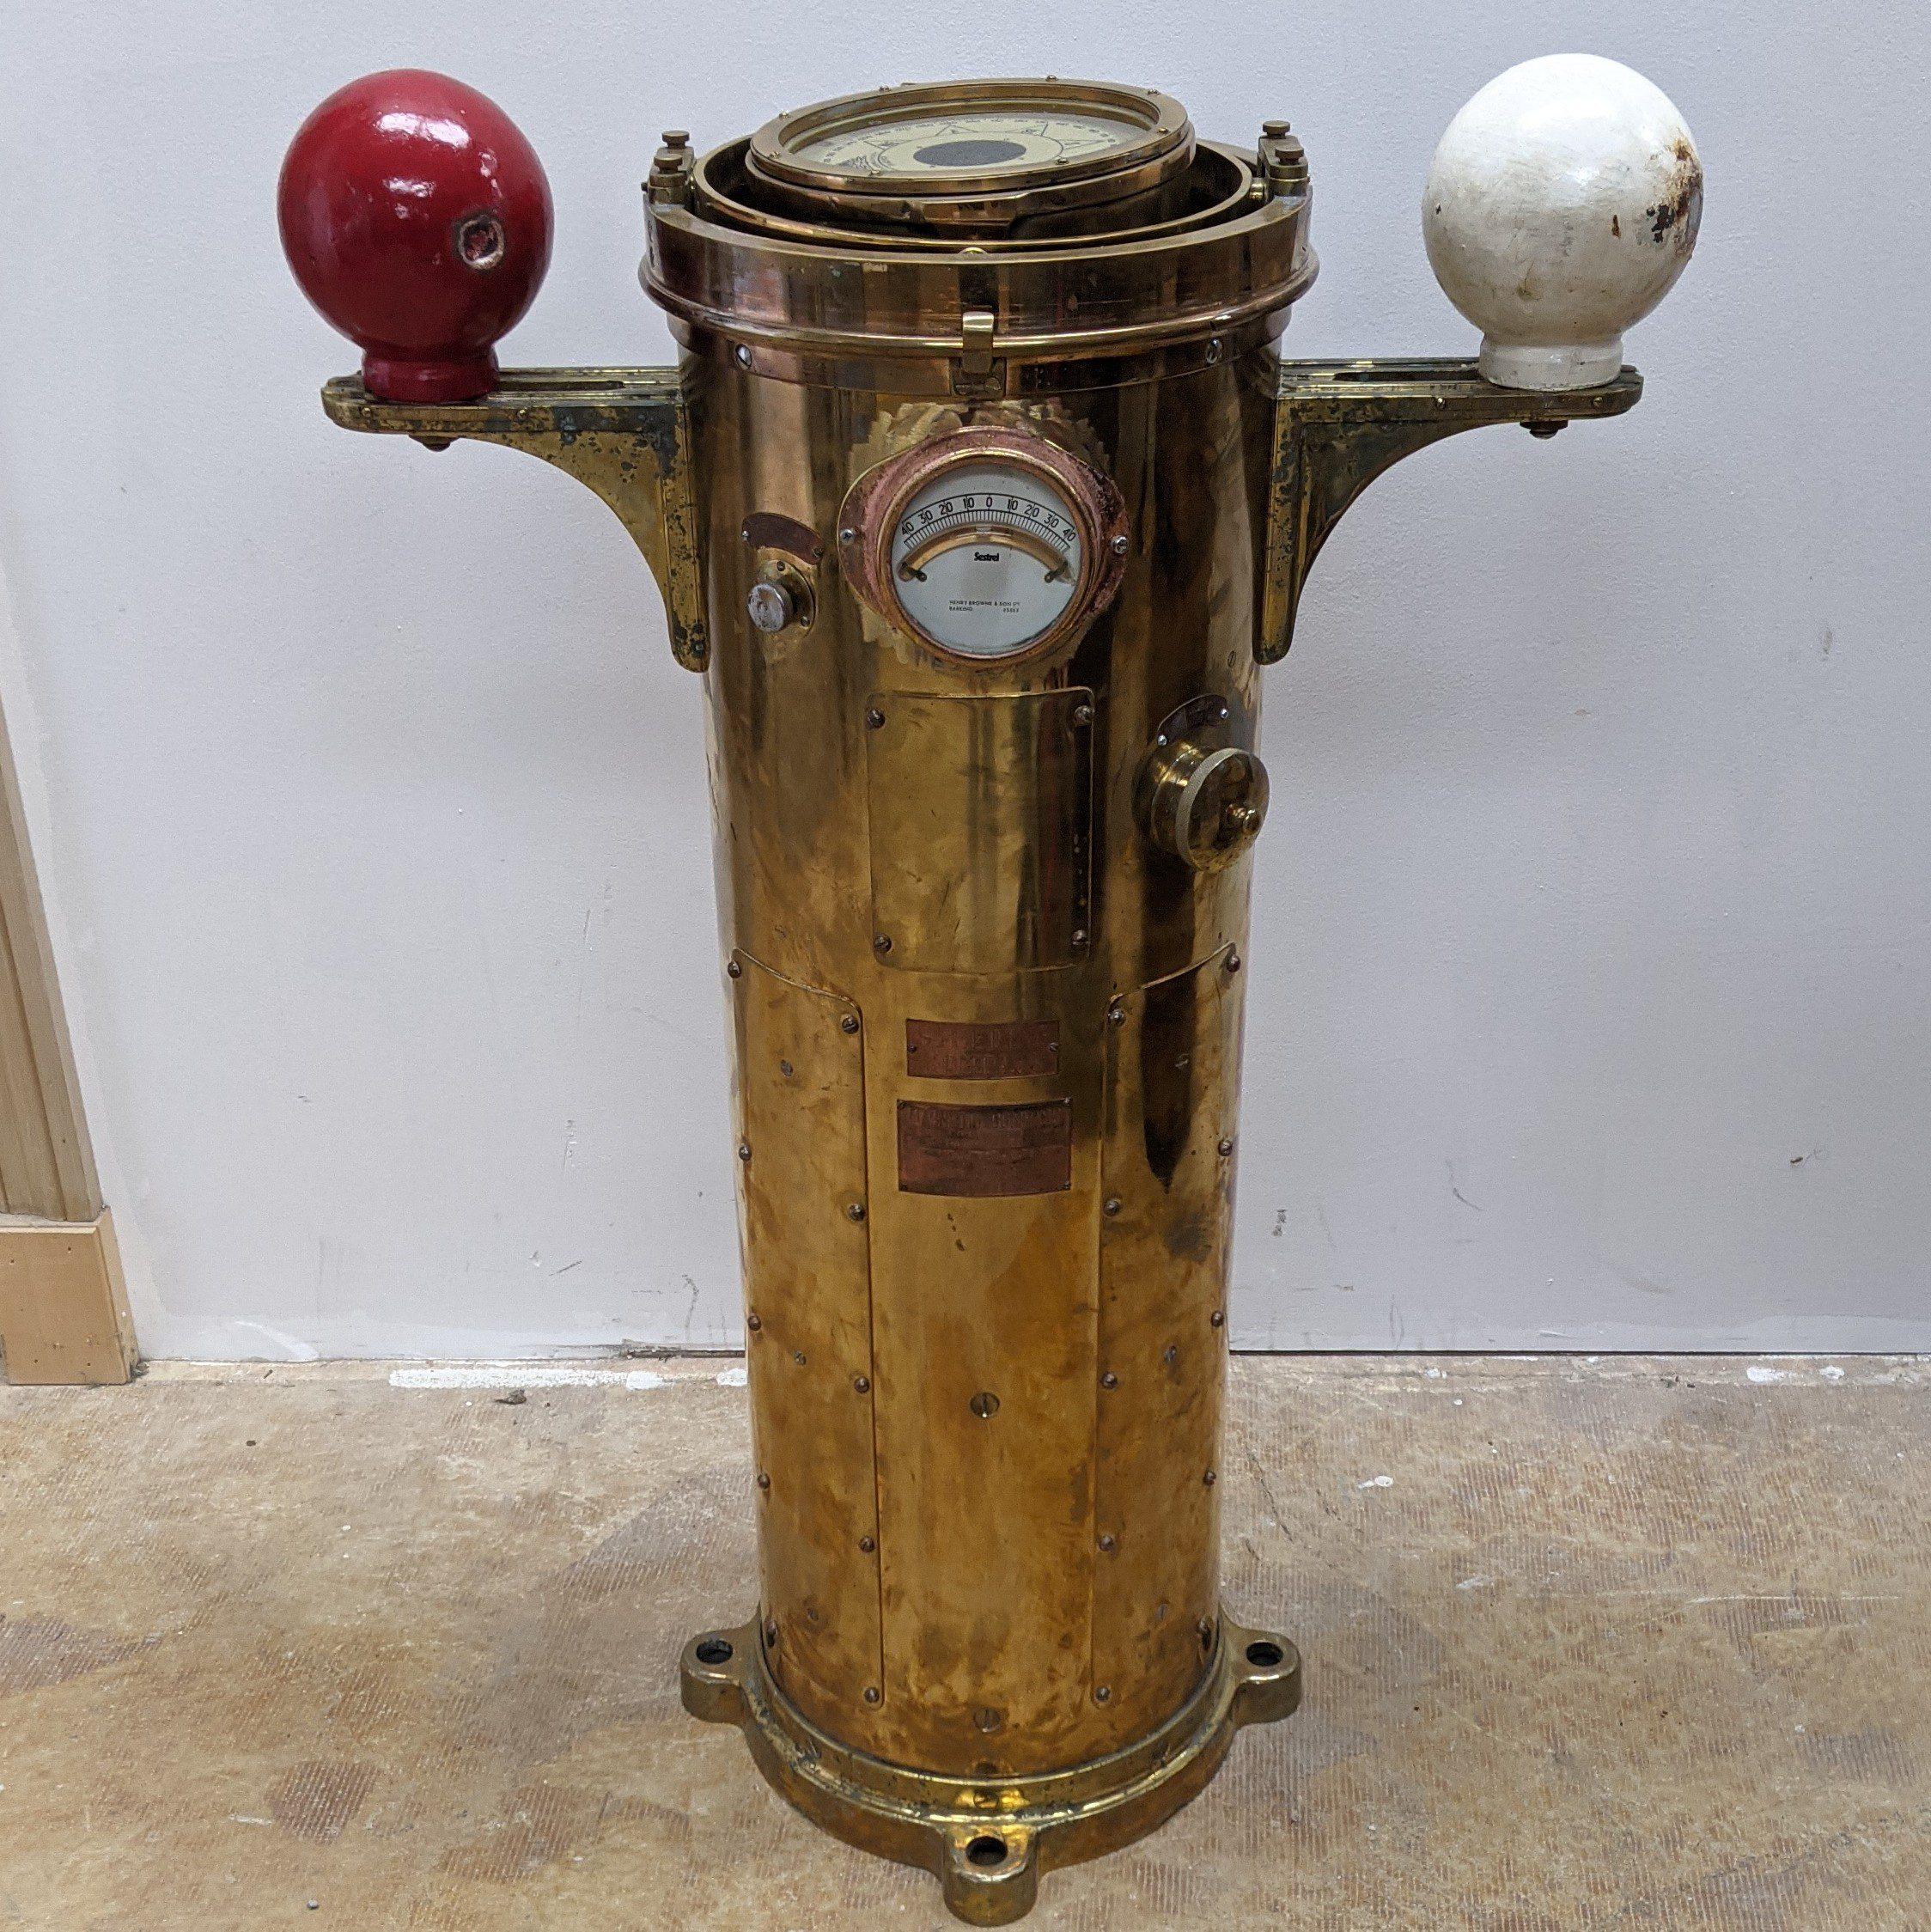 This is a Salvaged 1964 brass Osaka works Binnacle, a piece of maritime history that has been rescued from being lost forever. The binnacle housing, as well as the original compass before it was replaced, was crafted in Osaka, Japan by the renowned